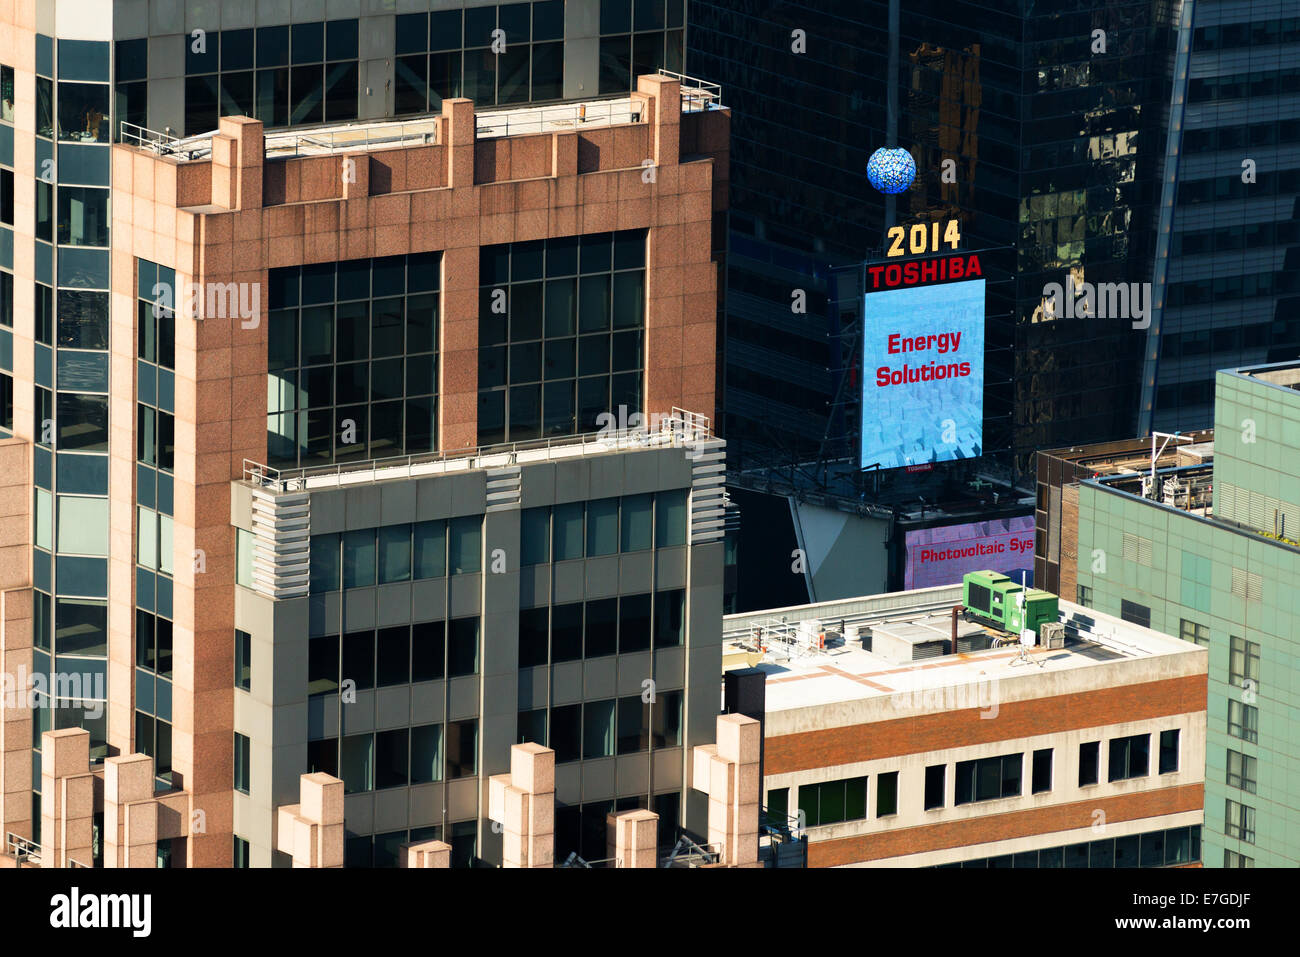 30 AUGUST 2014 - NEW YORK: Advertisement of the  'Toshiba' brand on Times Square reads 'Energy Solutions'. Stock Photo